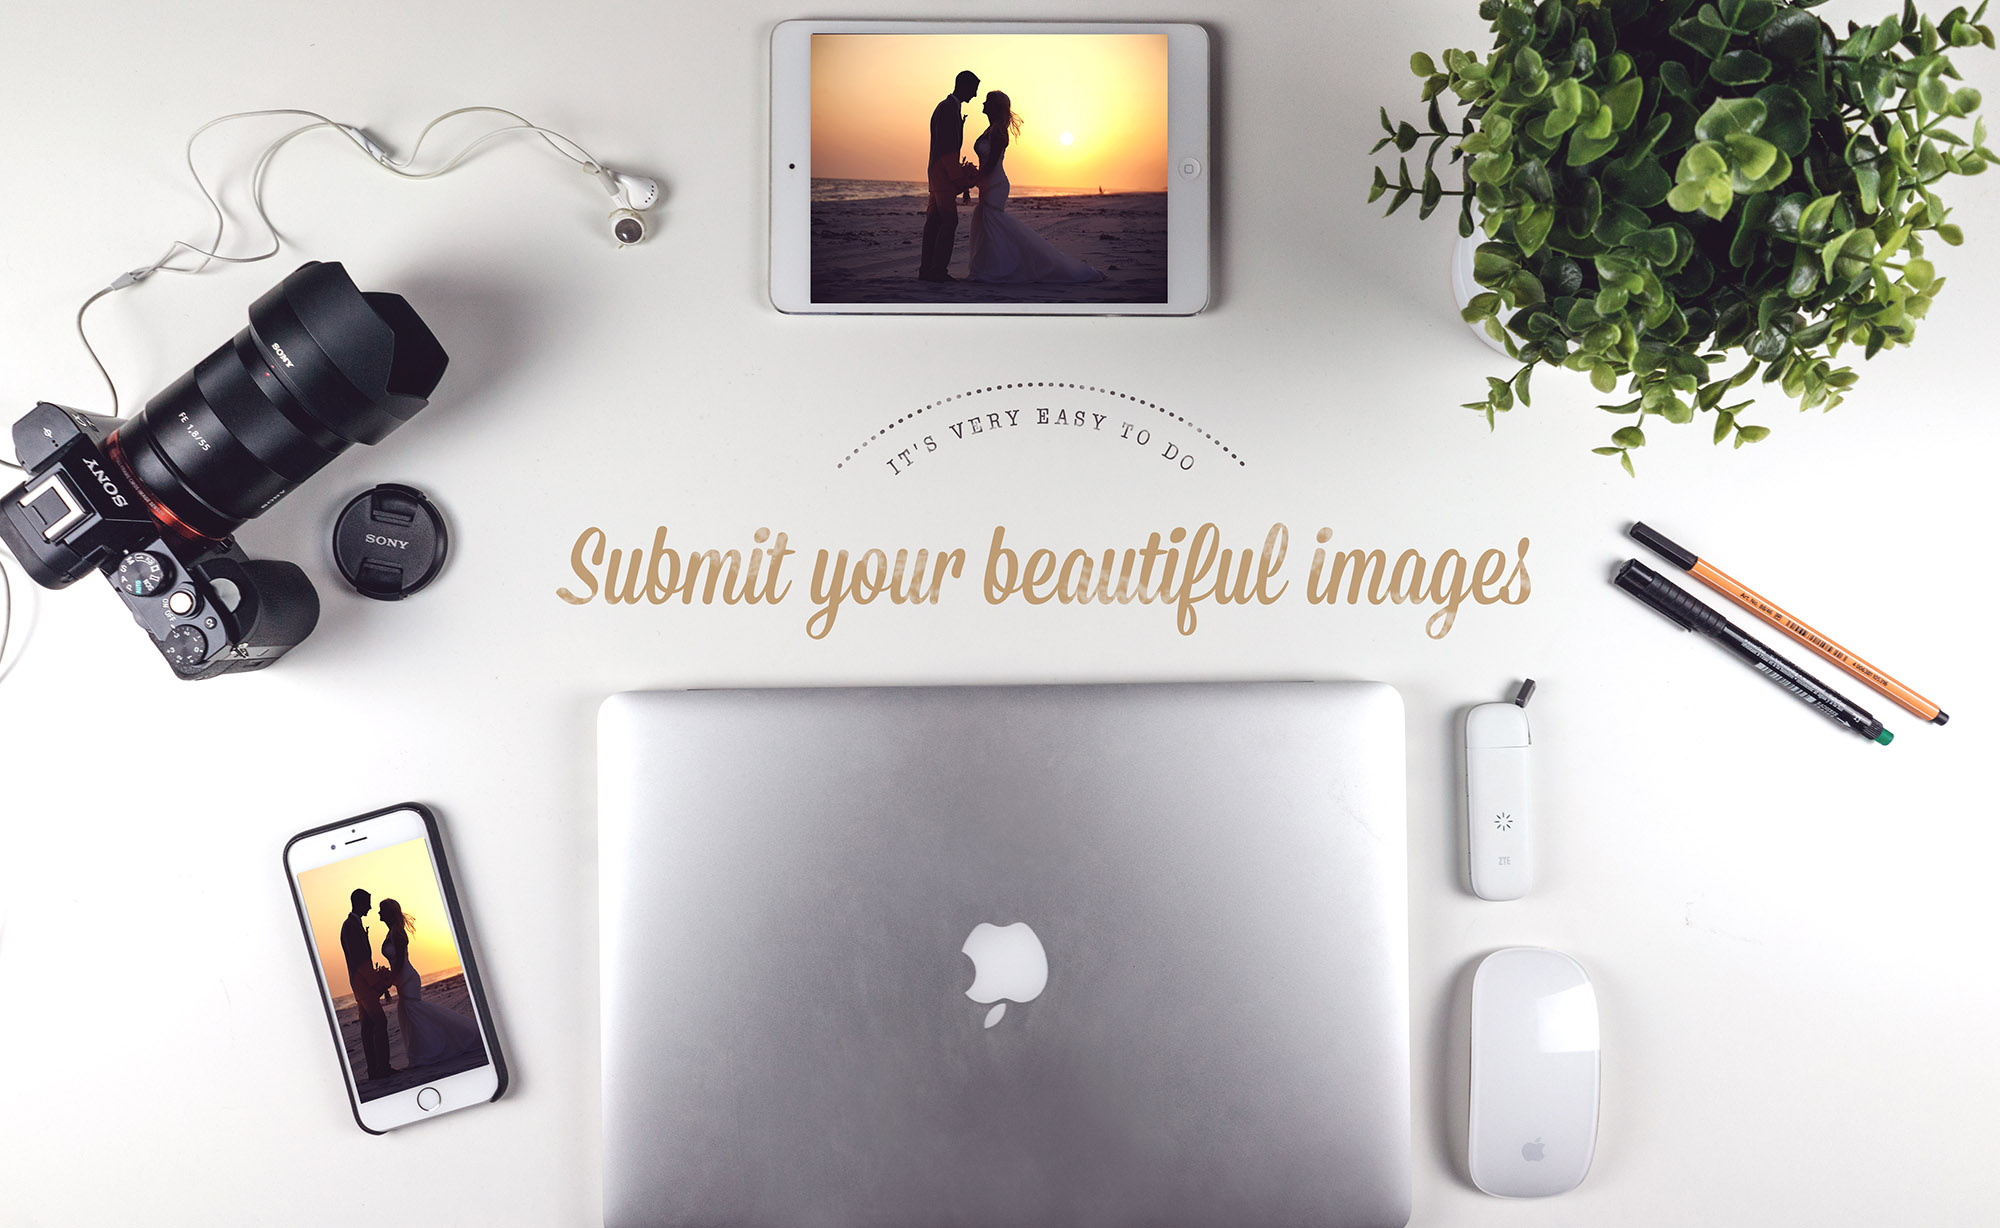 Submit your wedding images to our wedding photography blog for publication.